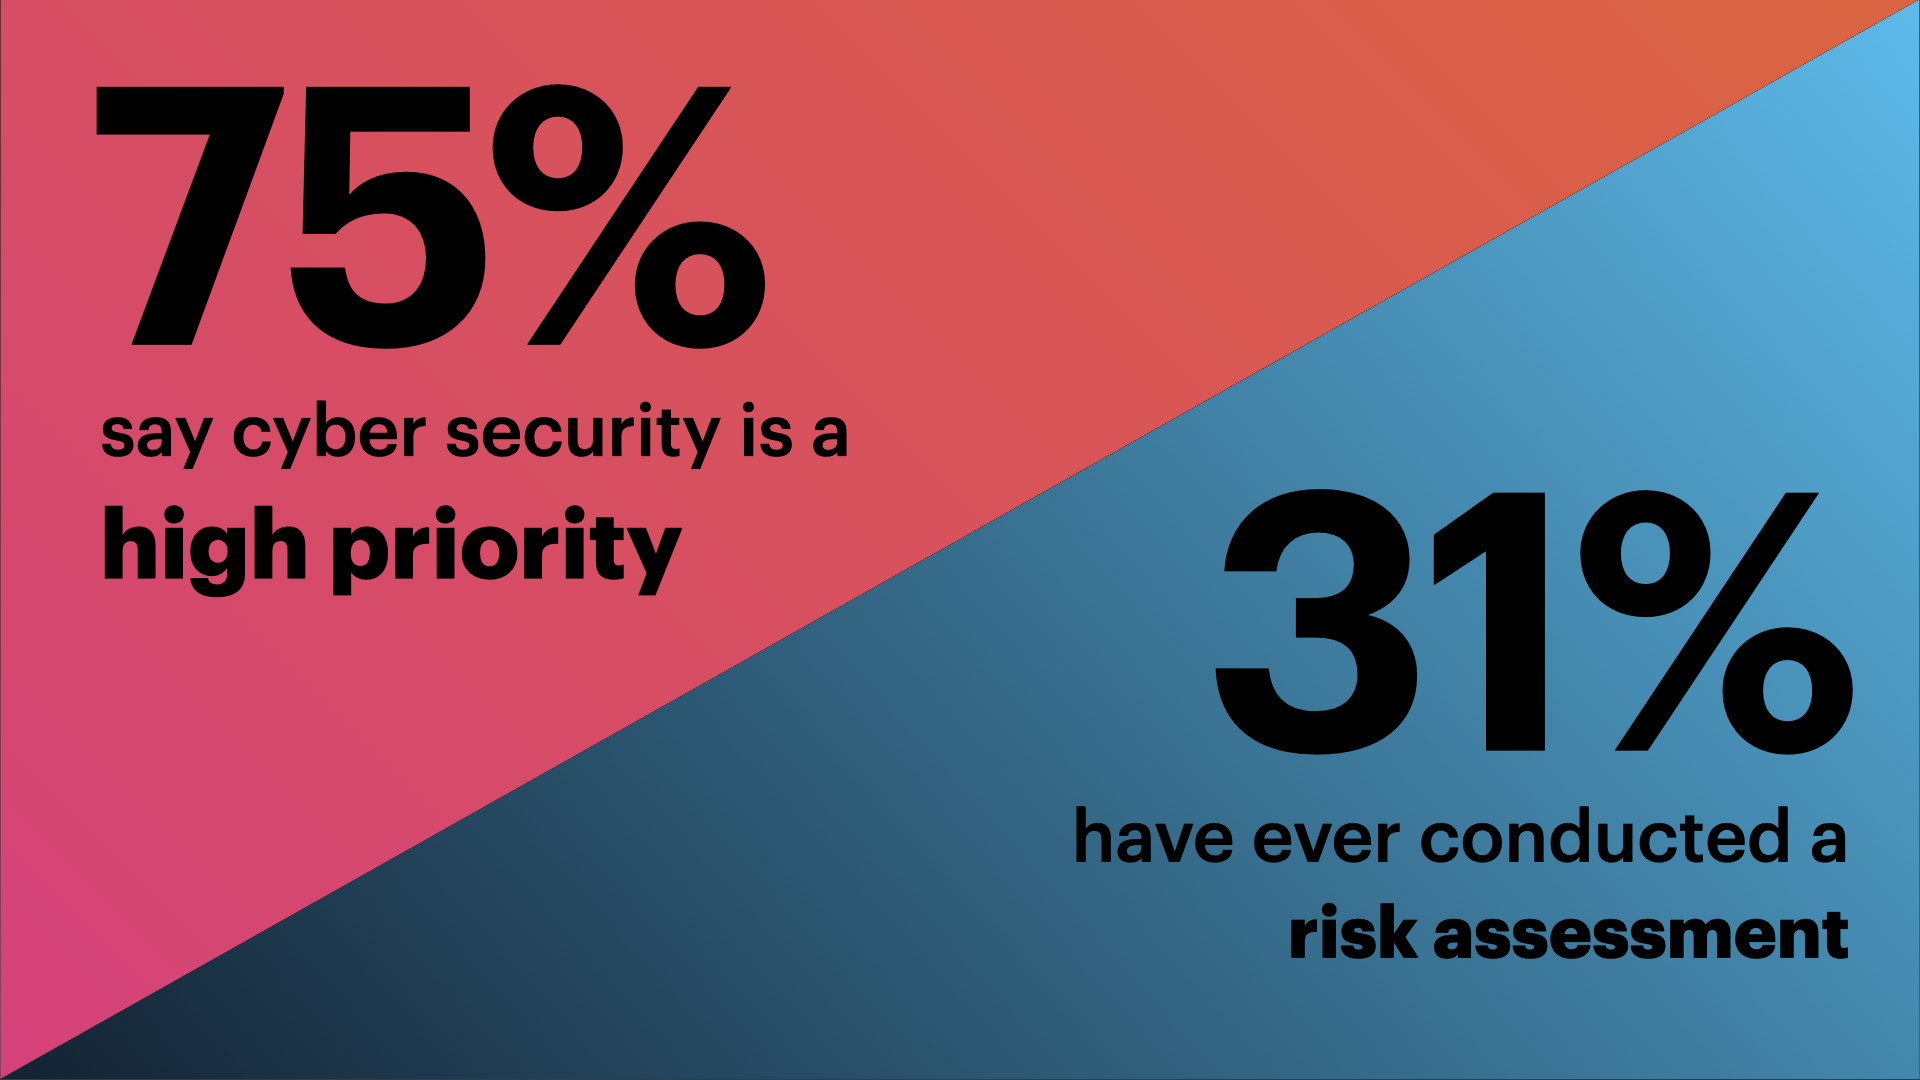 75% of businesses say cyber is a ‘high’ priority, while just 31% have actually assessed their cyber risk